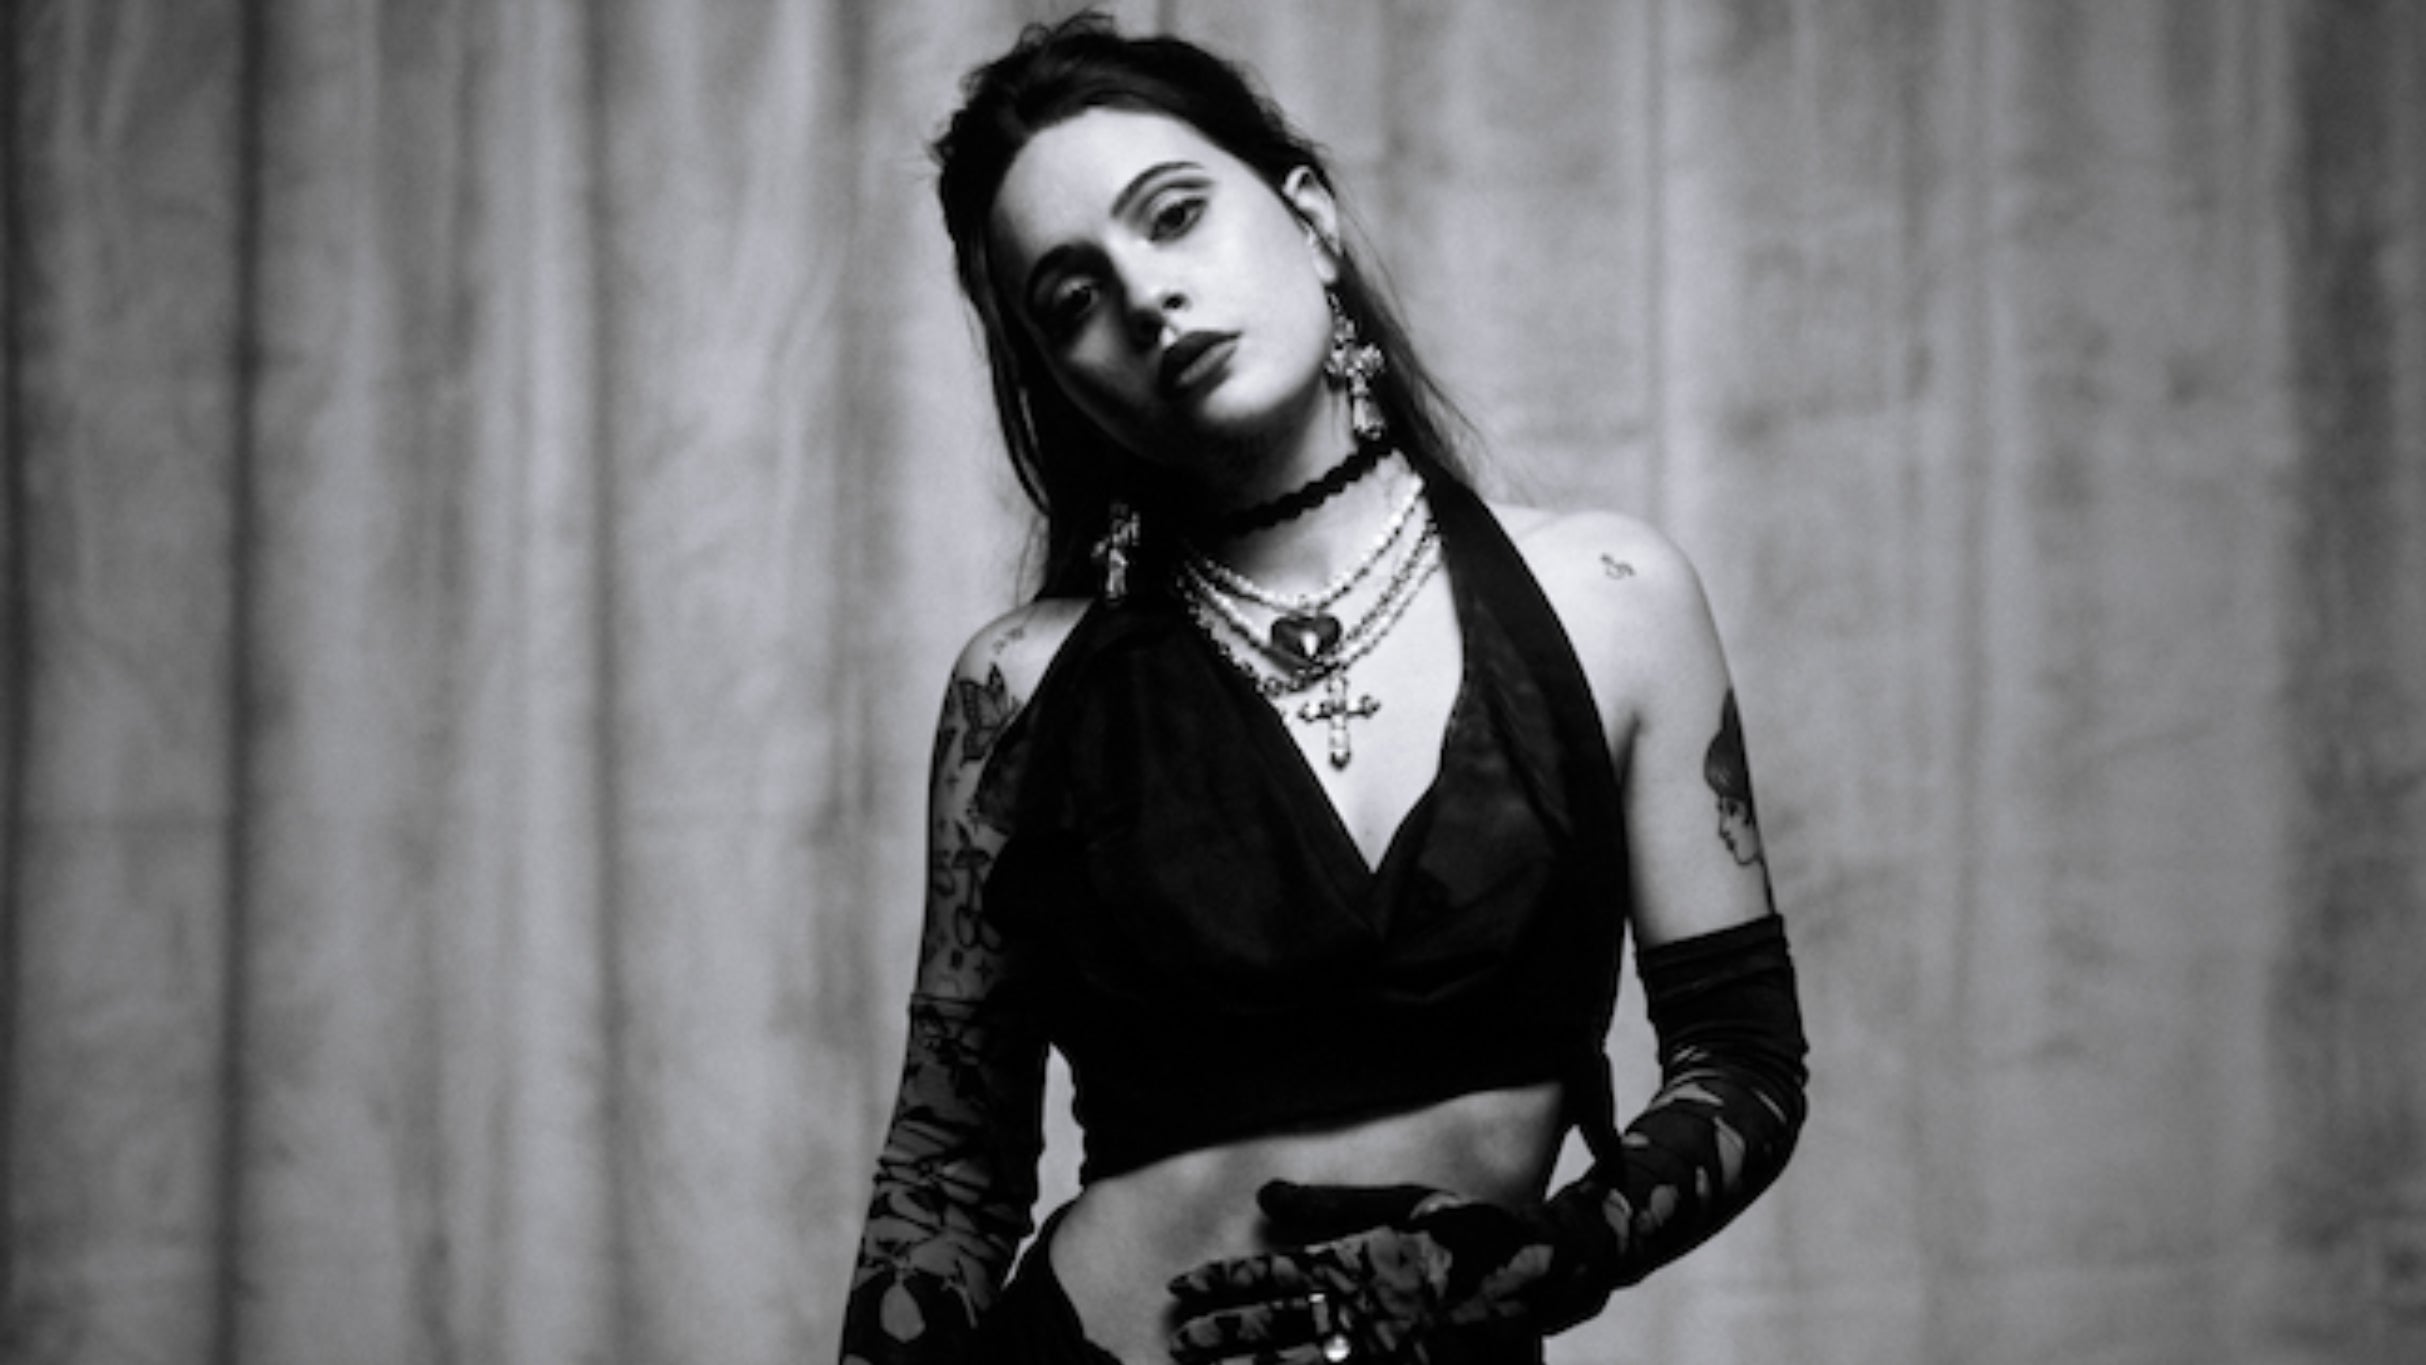 bea miller - gauche tour presale code for show tickets in New York, NY (Irving Plaza)